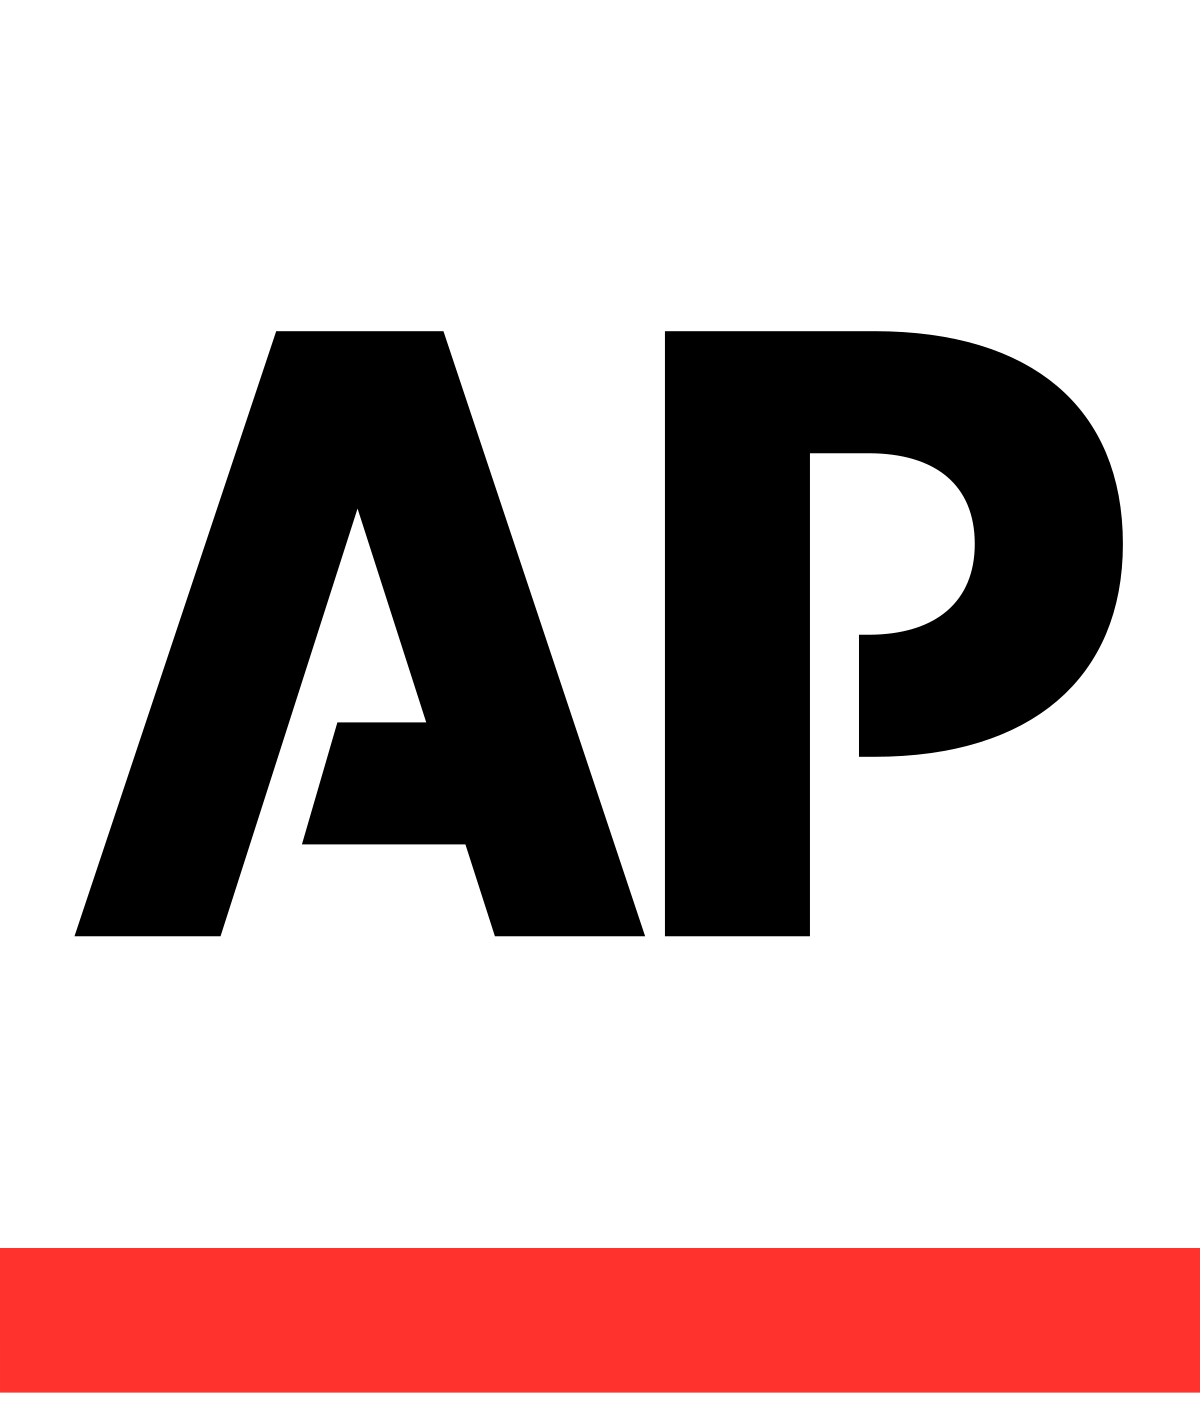 The image shows the letters "ap" in bold black font centered on a white background, with a red stripe below the letters, symbolizing a campaign for divorce lawyers near Nassau County, NY.